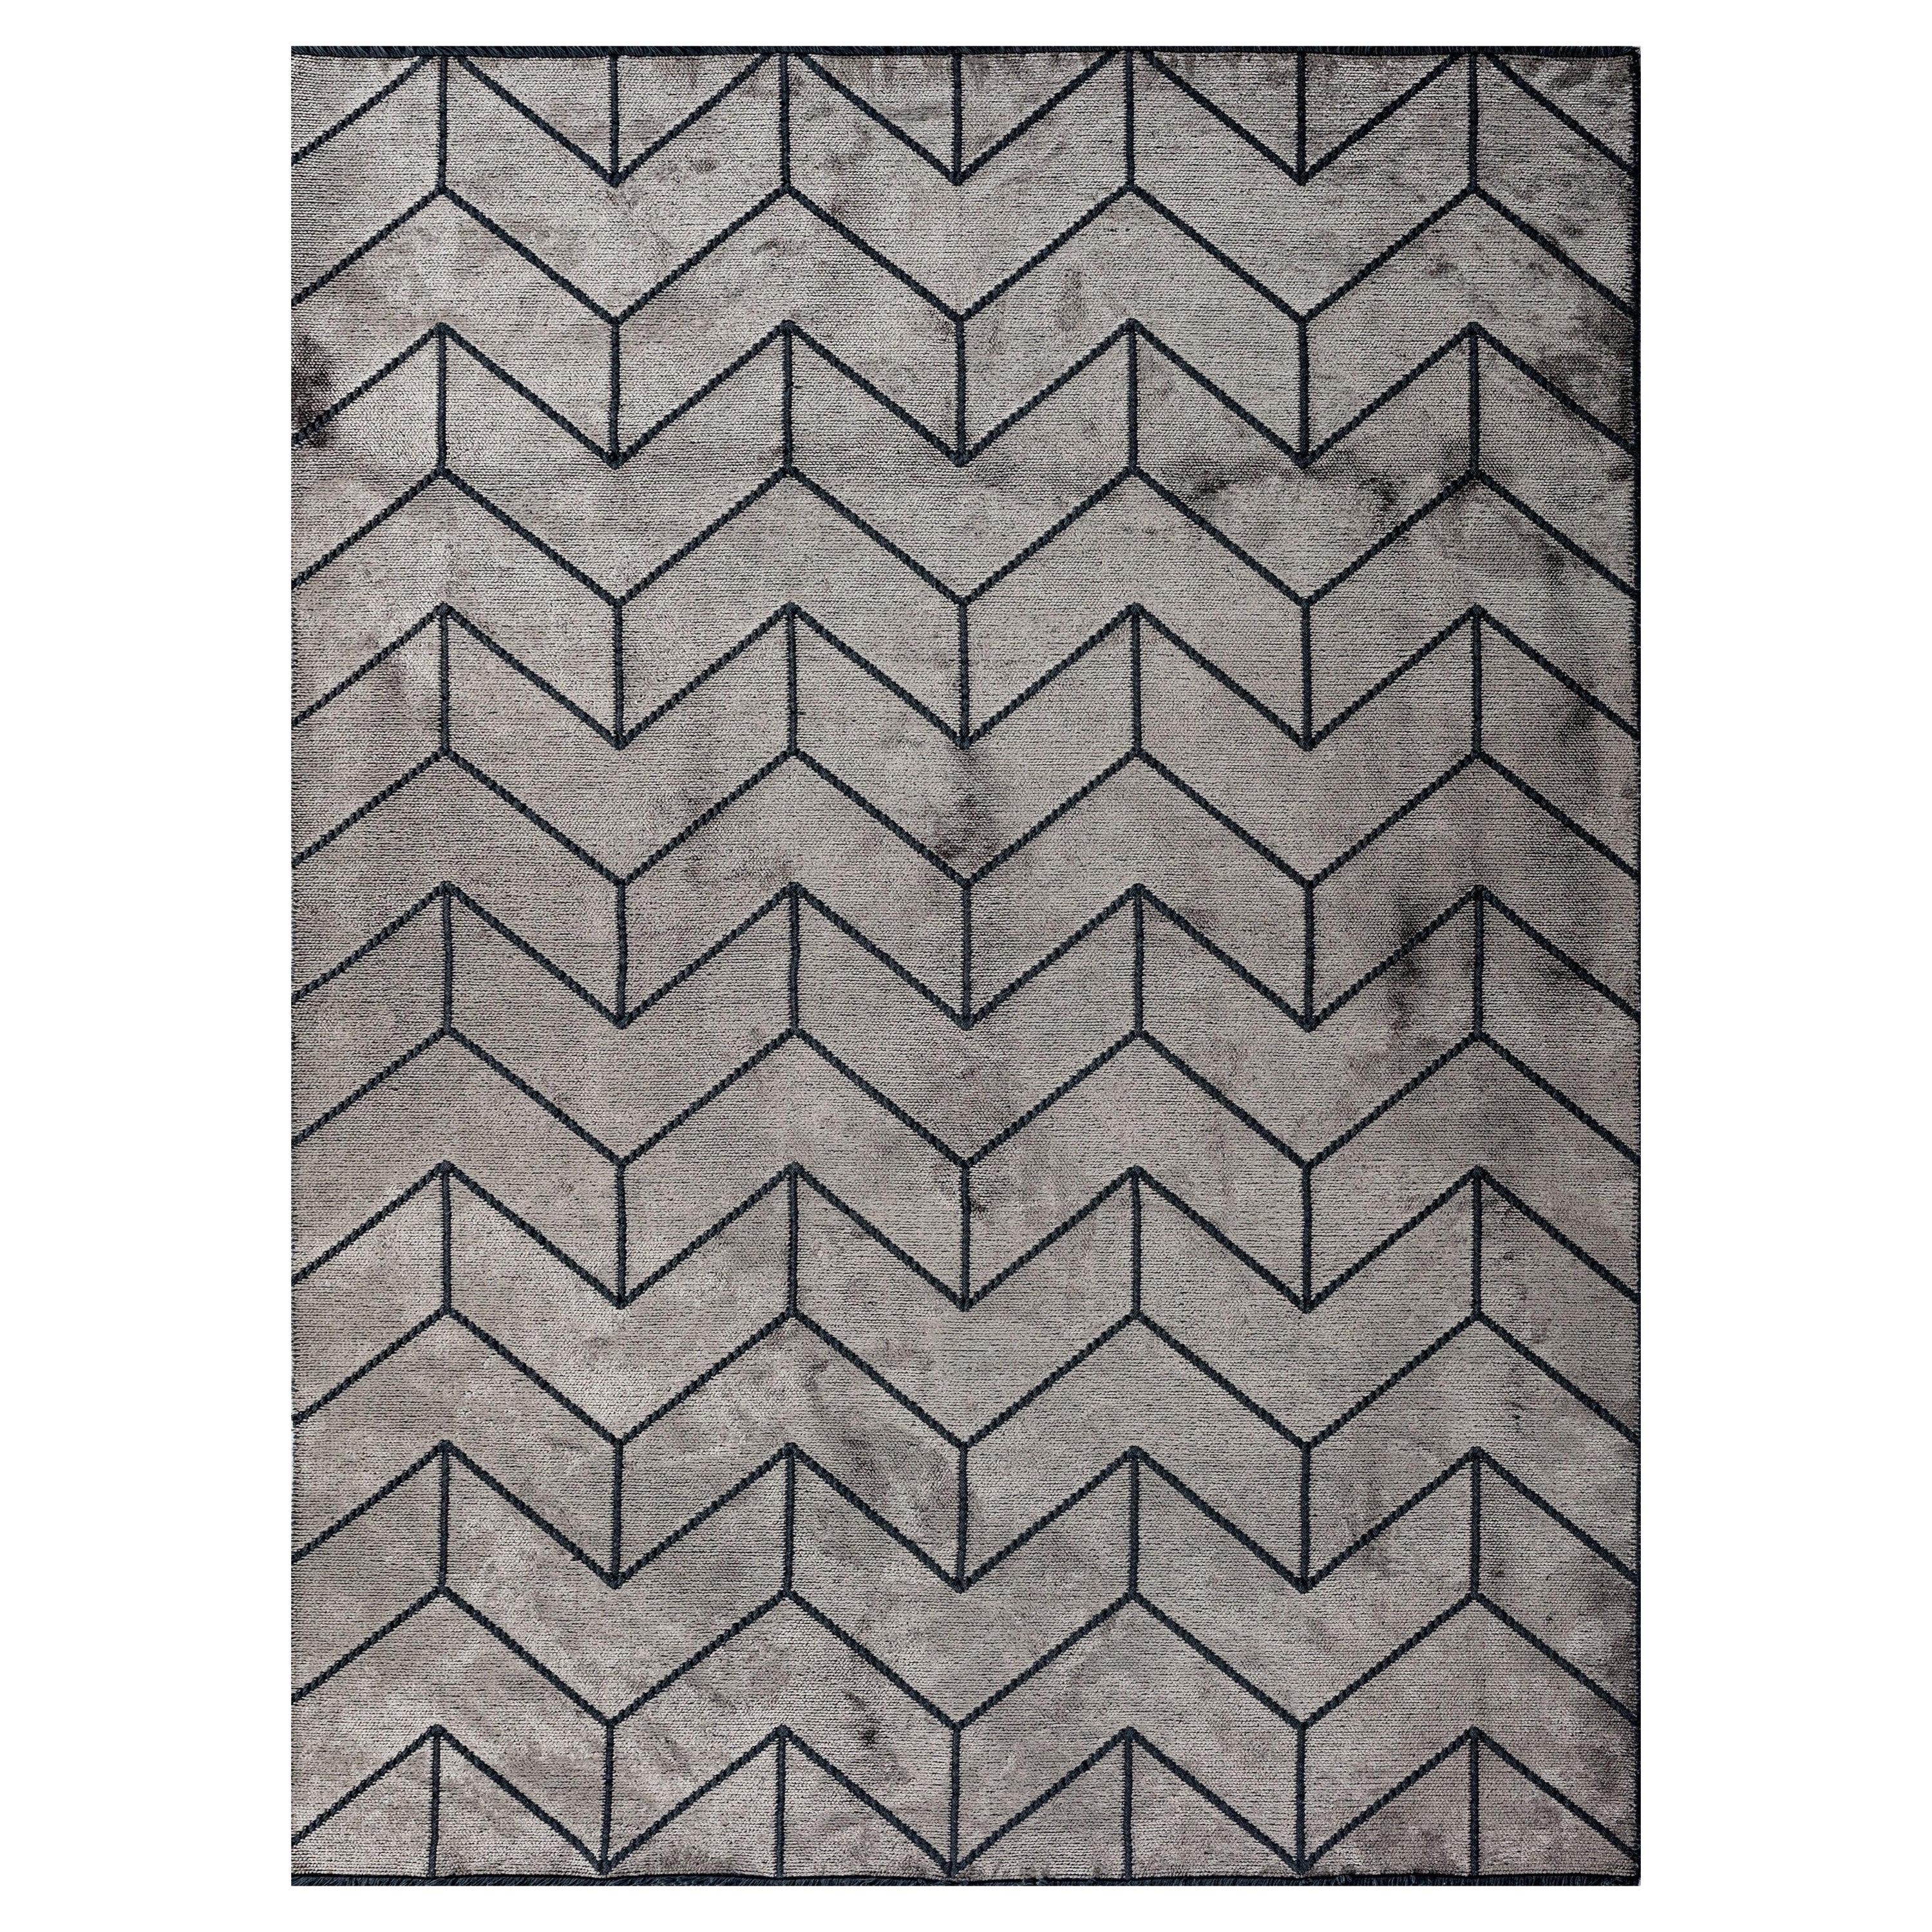 For Sale:  (Gray) Modern Chevron Luxury Hand-Finished Area Rug